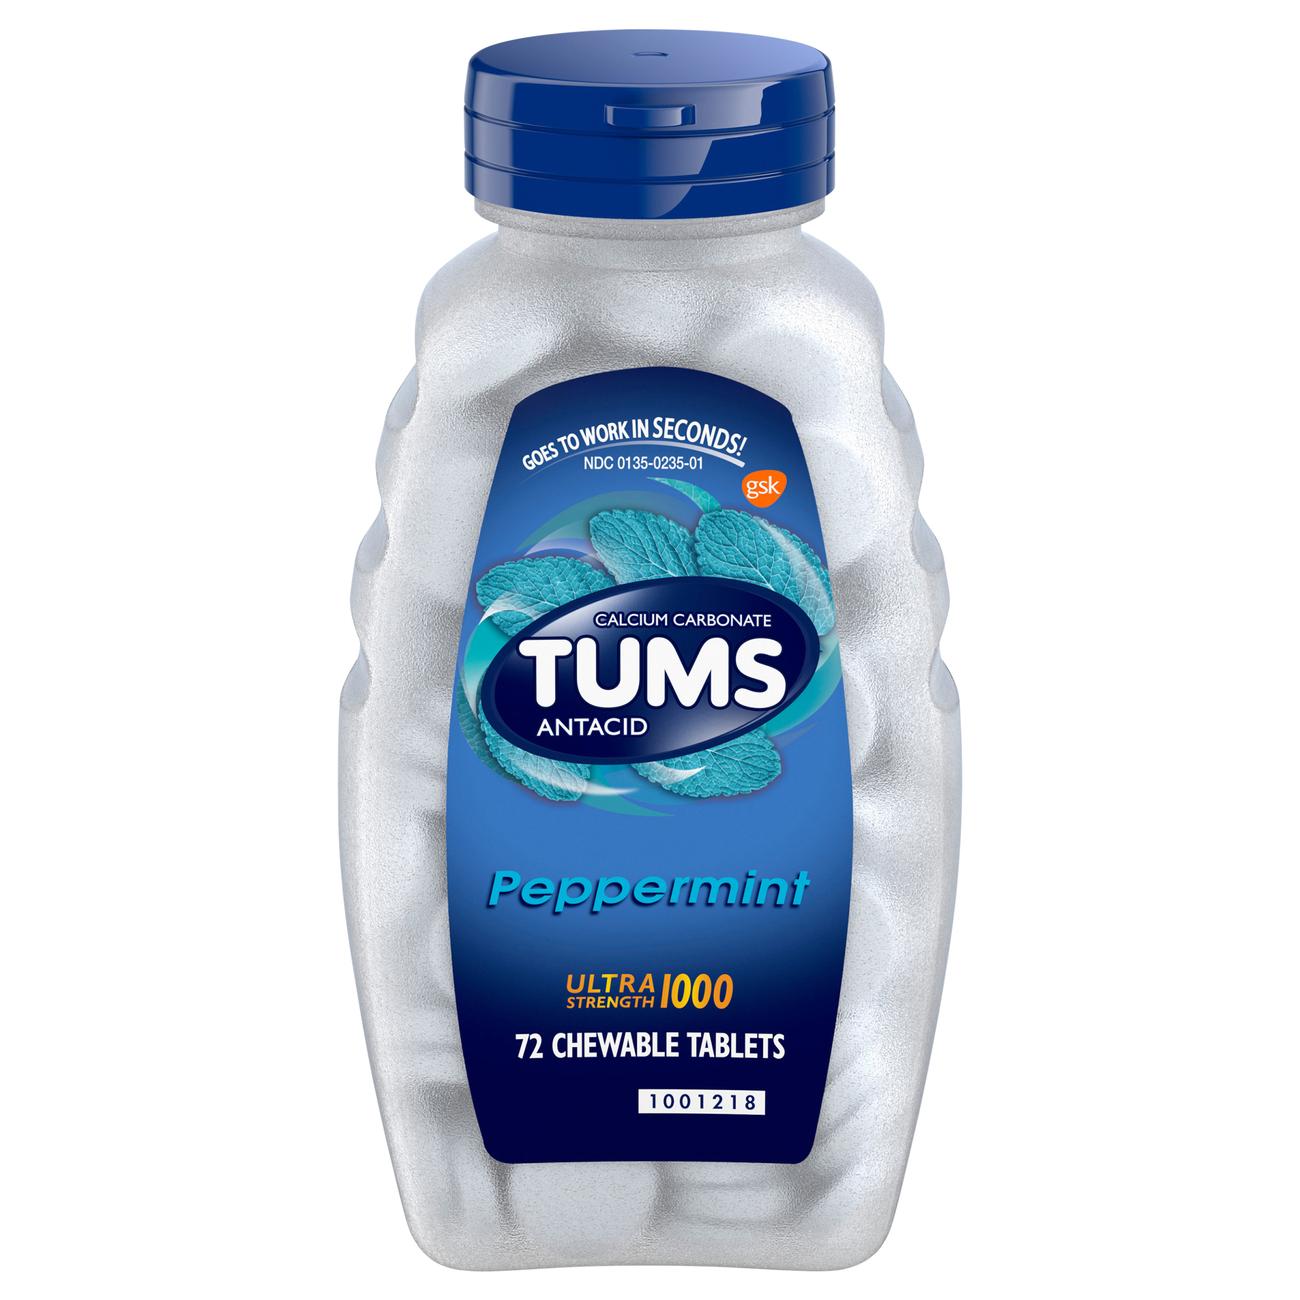 Tums Antacid Ultra Strength Chewable Tablets - Peppermint